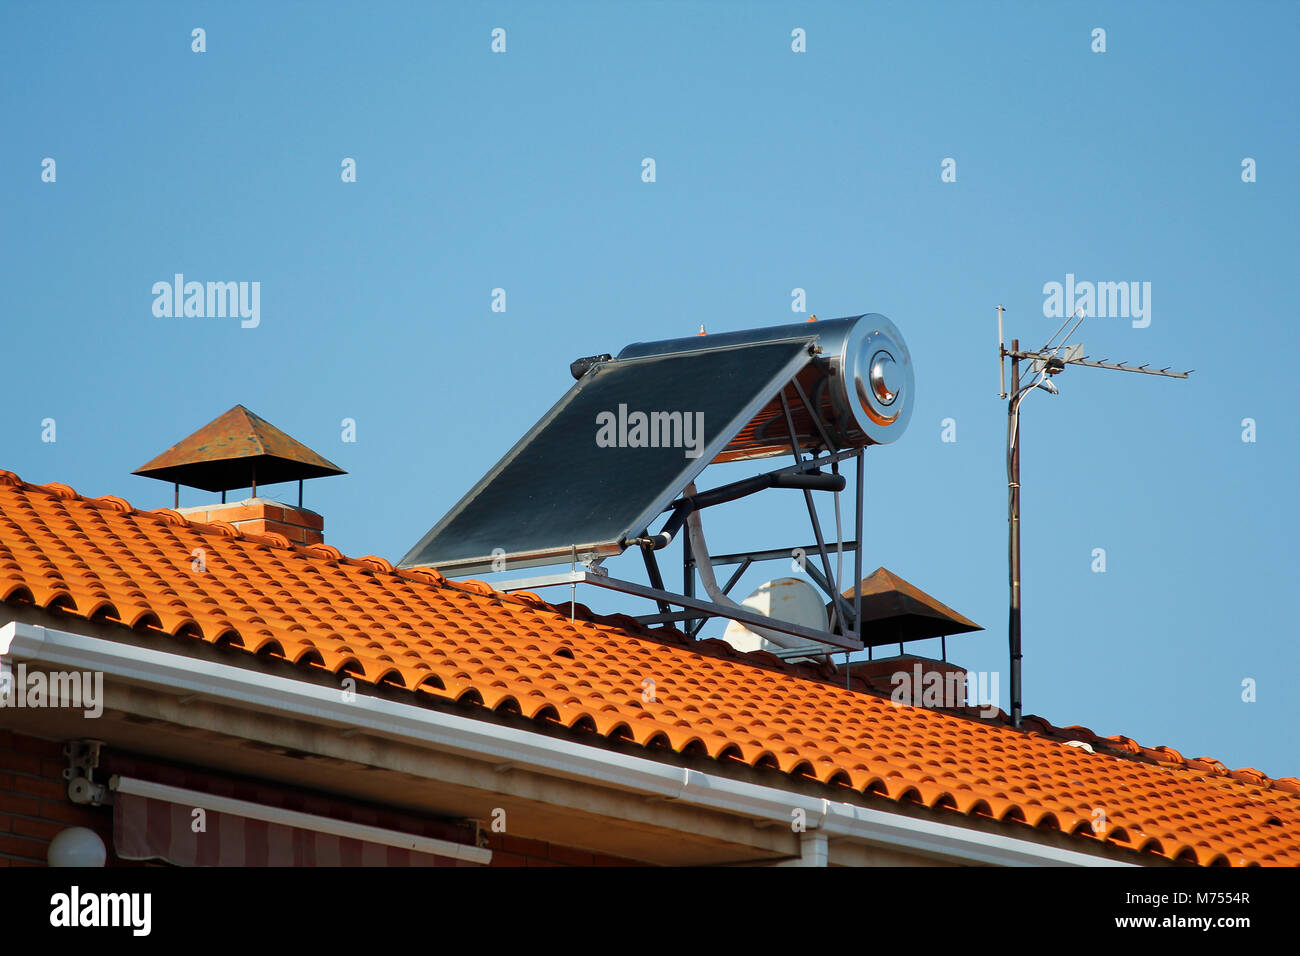 Solar panel for heating water and television antennas, in a roof of a house Stock Photo